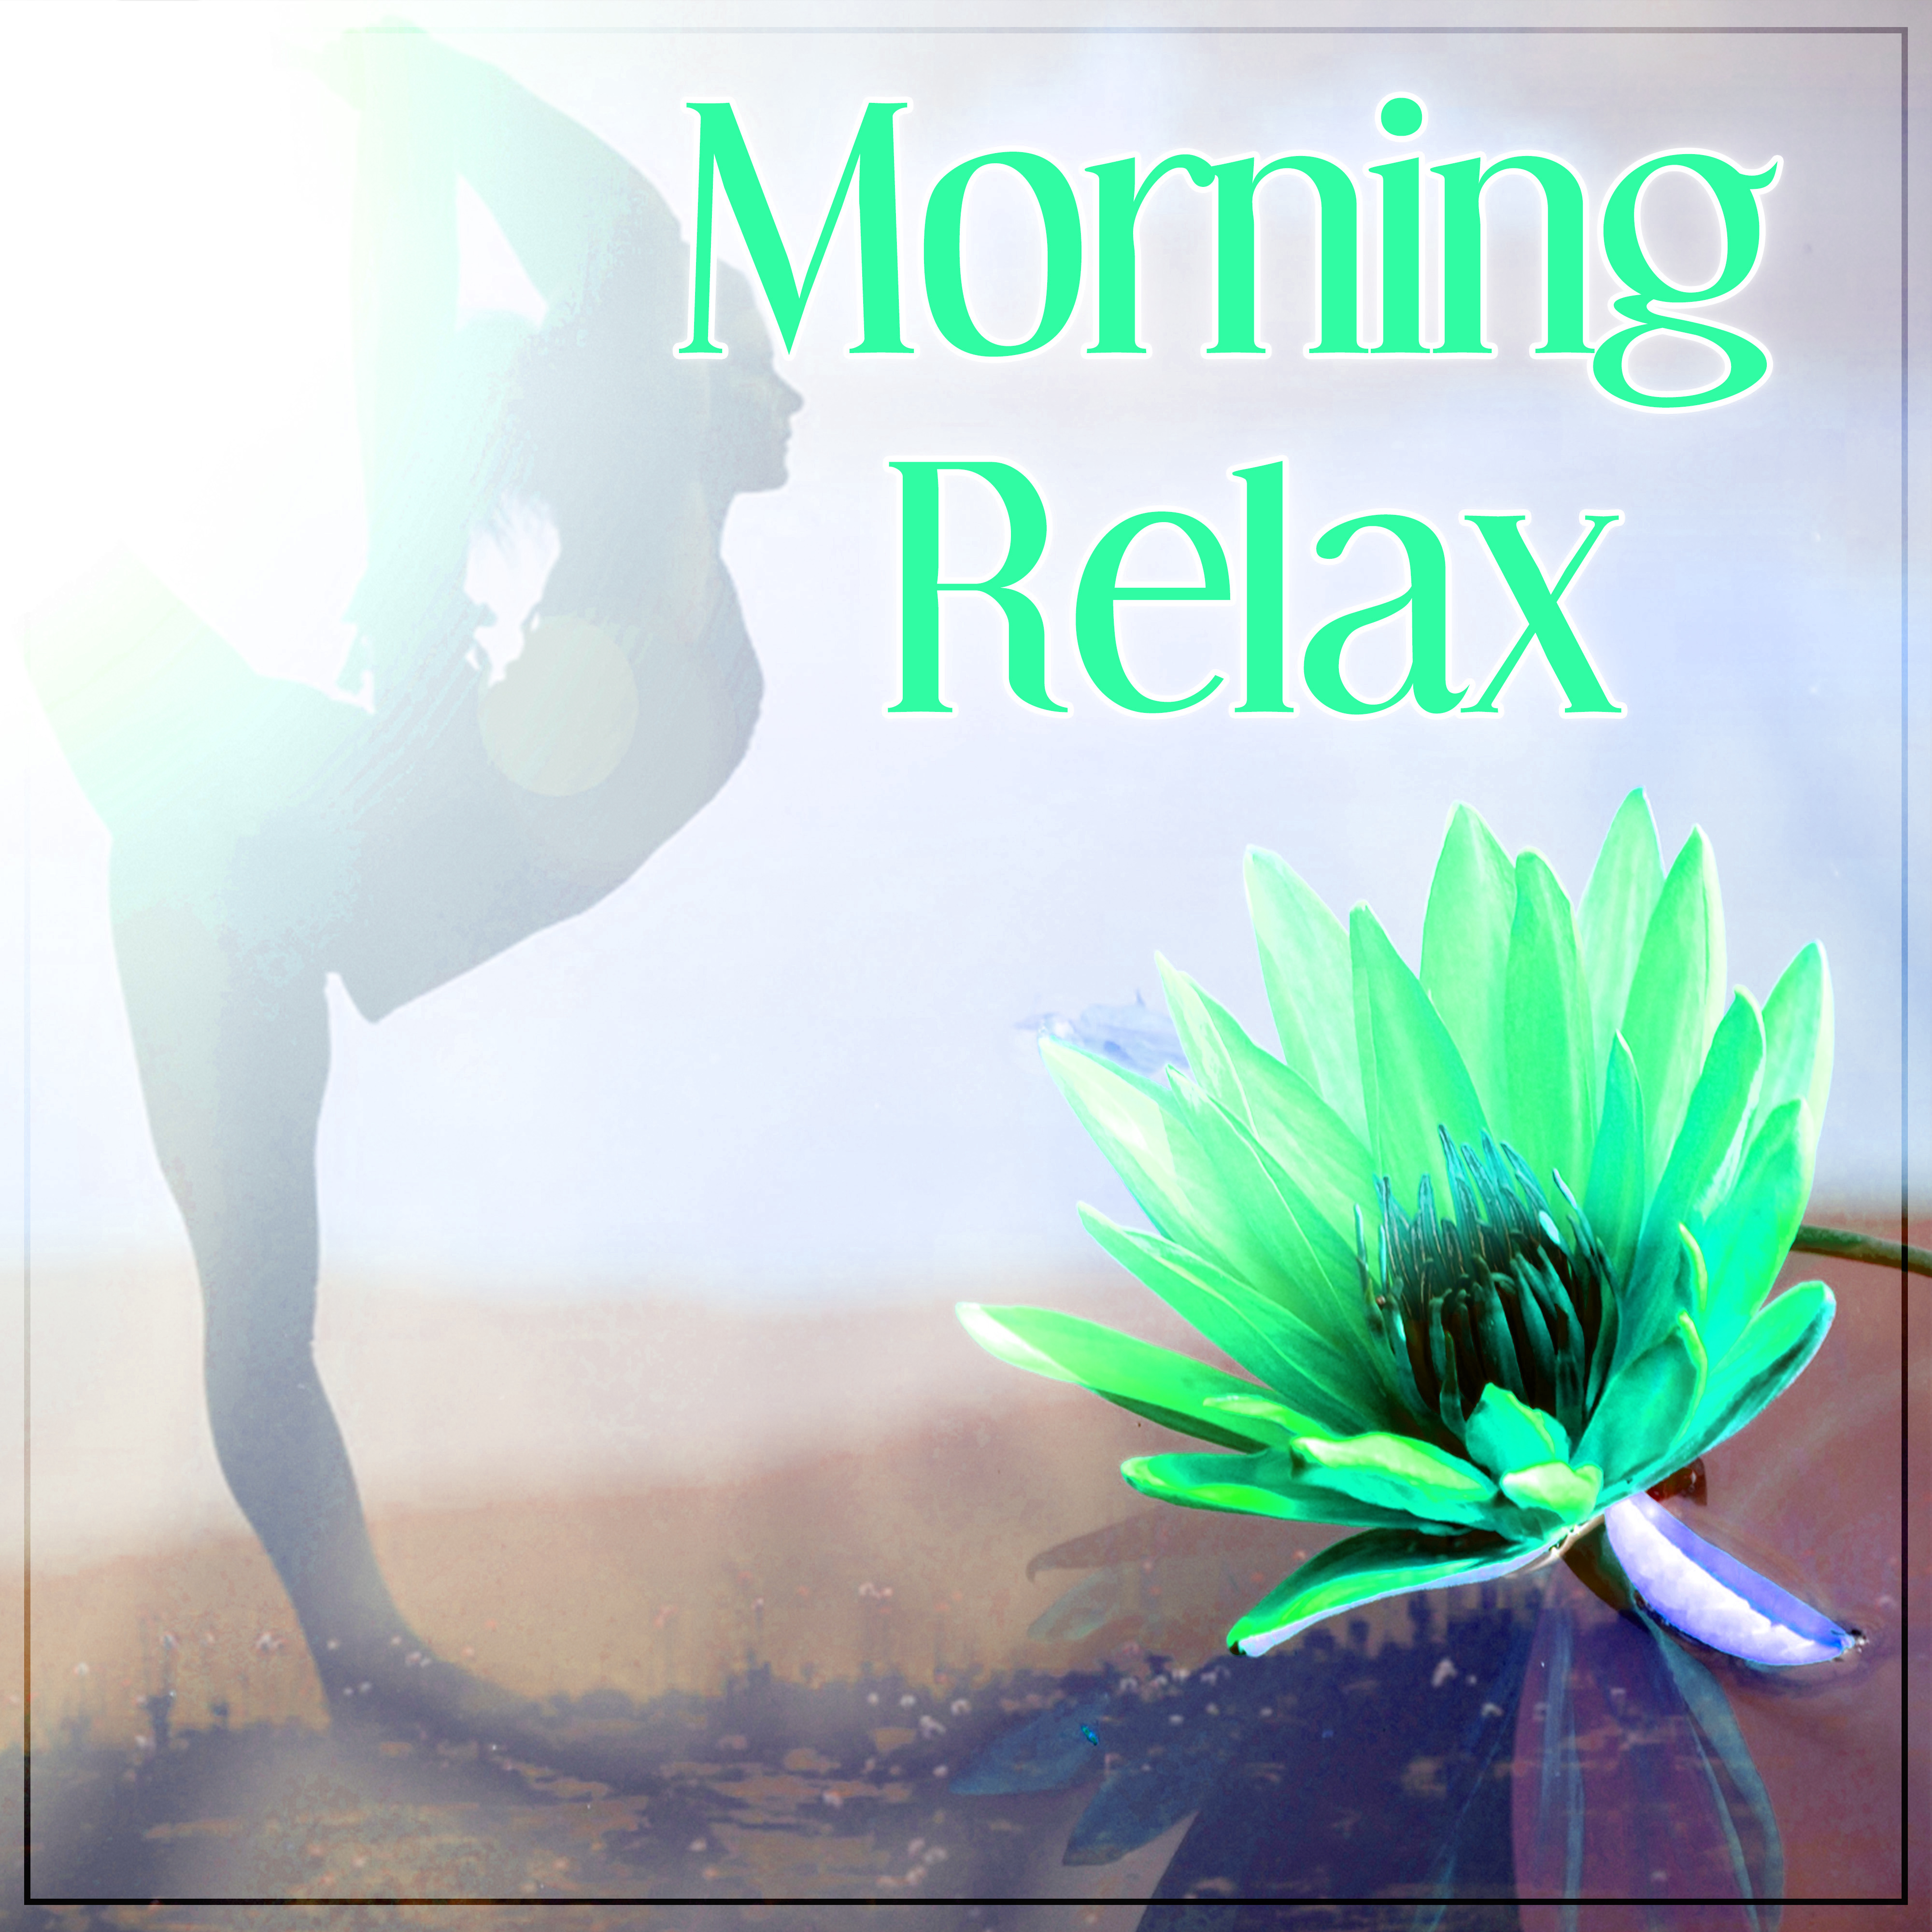 Morning Relax – Peaceful New Age Music for Start Day with Positive Energy, Mindfulness Meditations, Best Relaxation Music, Calm Down, Sound Therapy